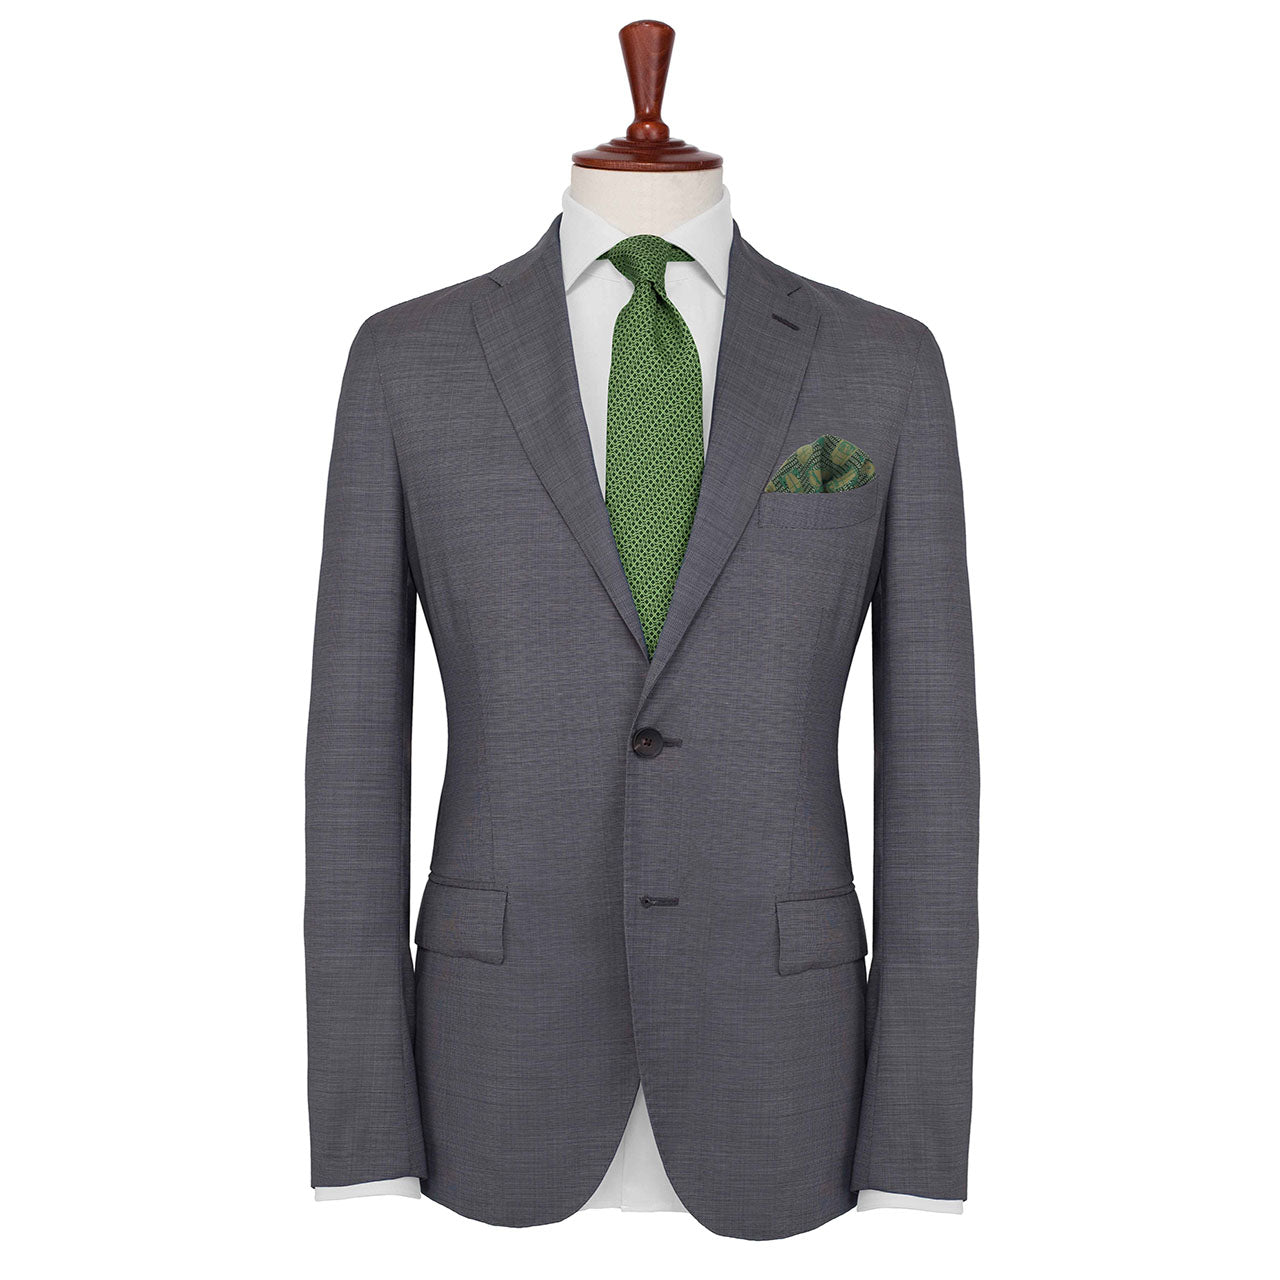 Racing Allegory Pistachio and Fern Green Pocket Square